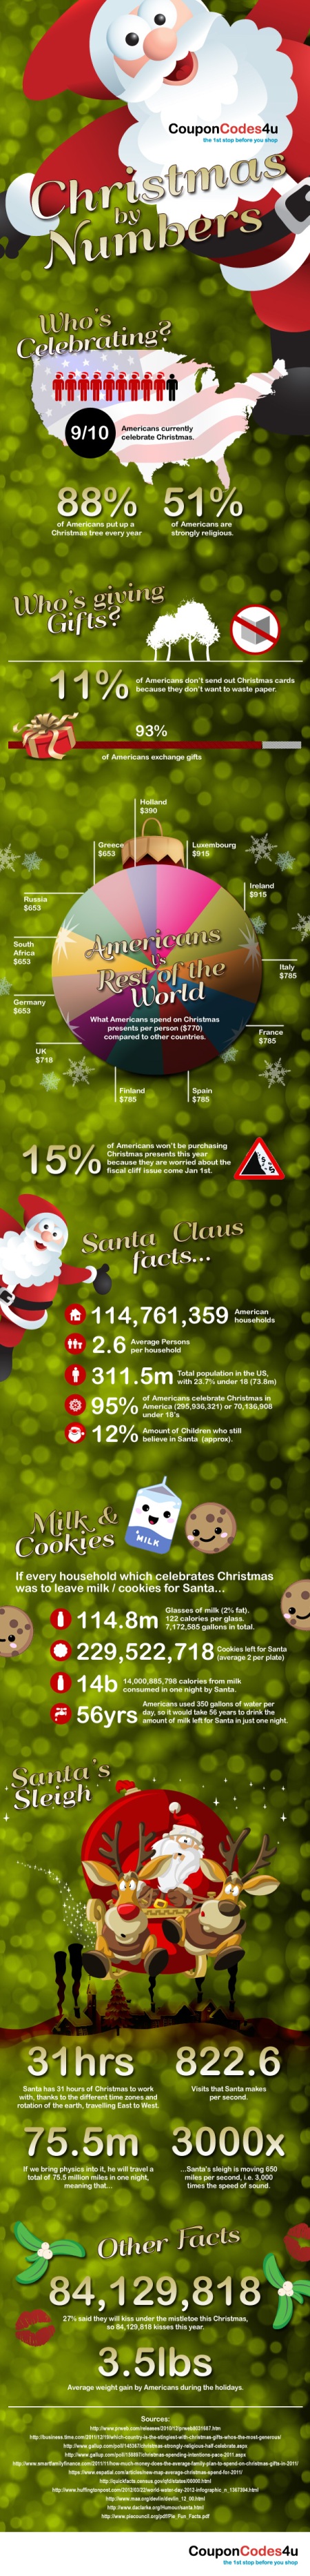 Christmas by Numbers